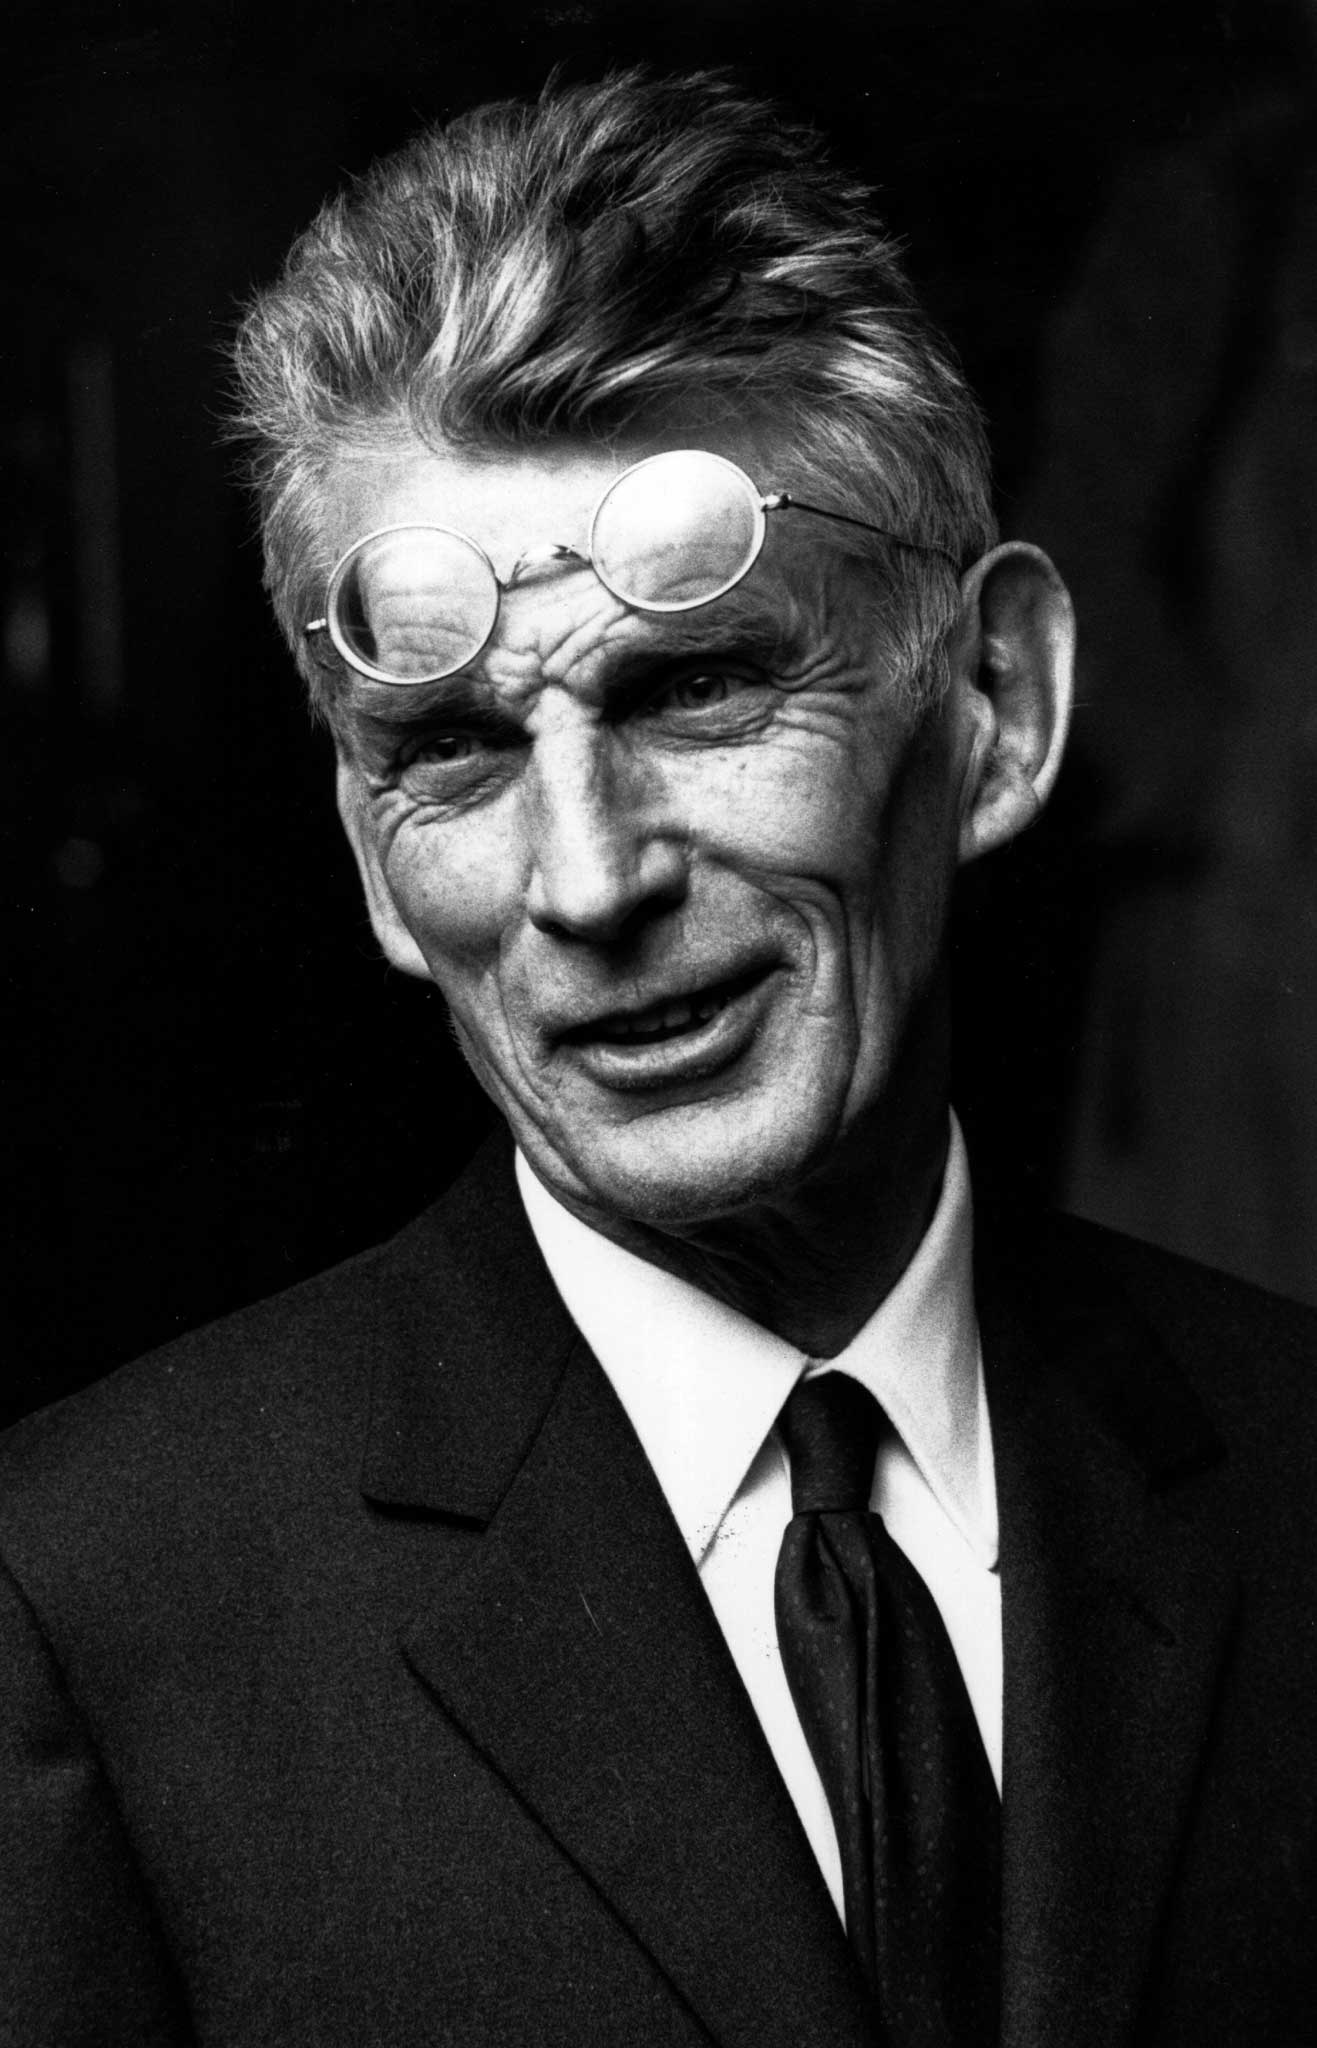 Samuel Beckett originally wrote the book in French